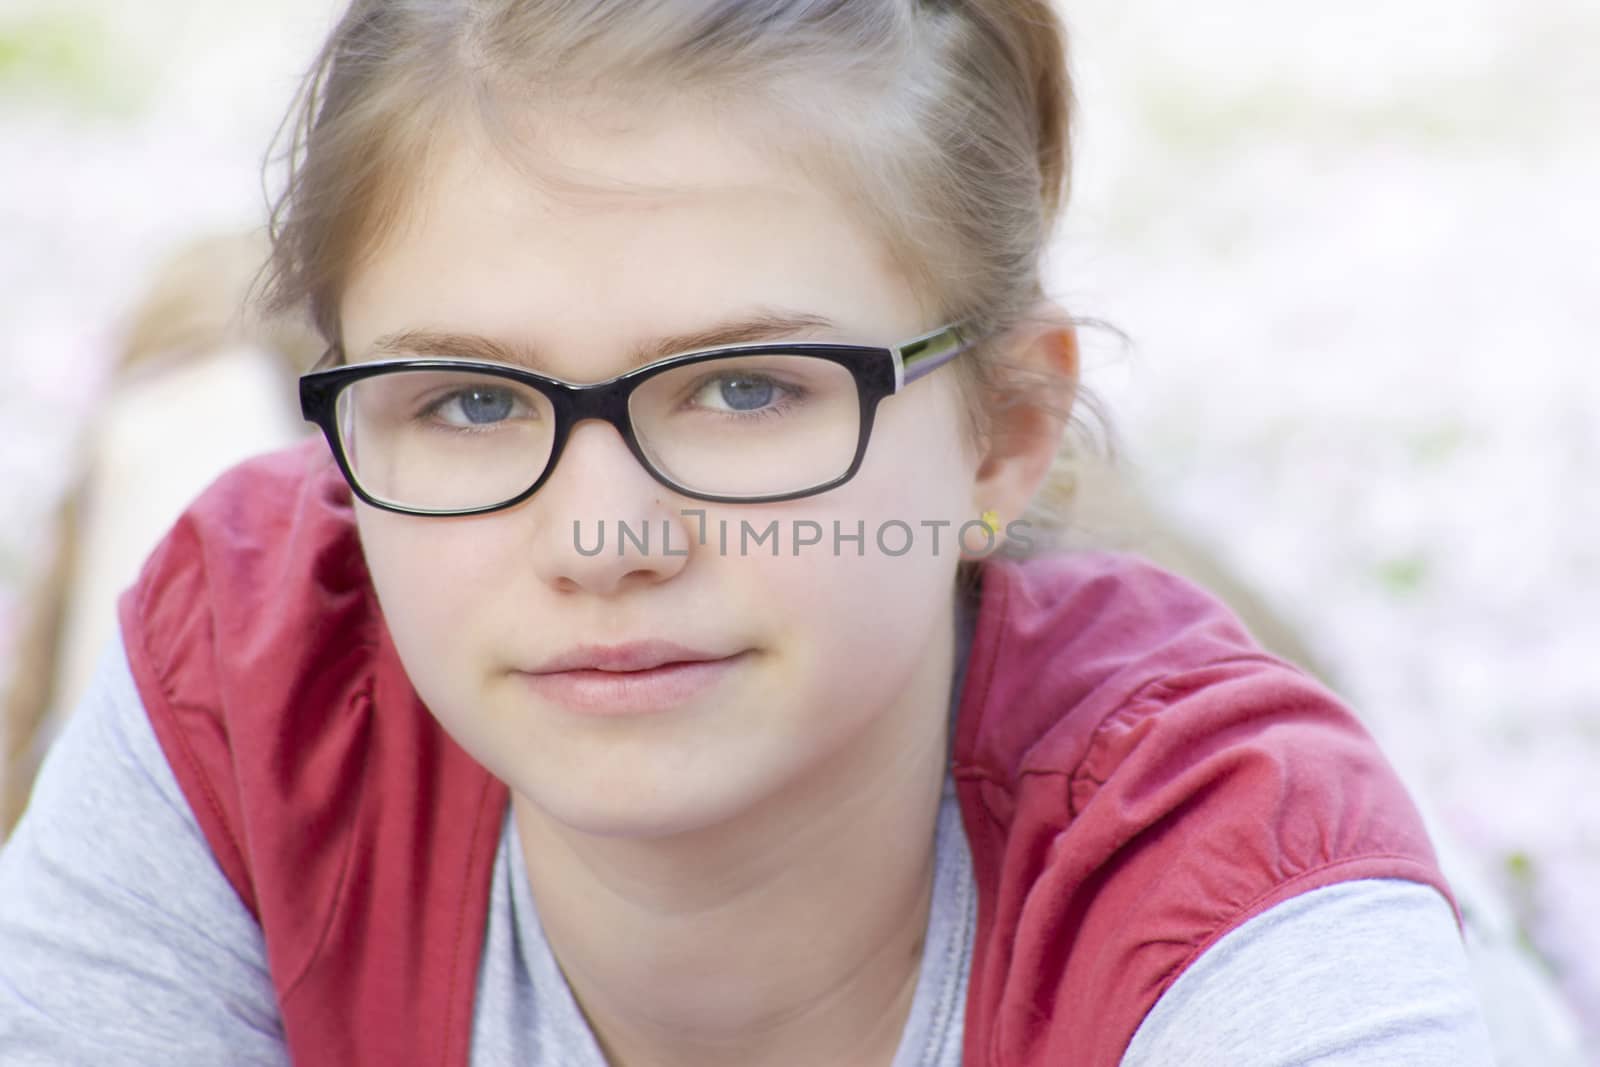 portrait of young girl with glasses by miradrozdowski